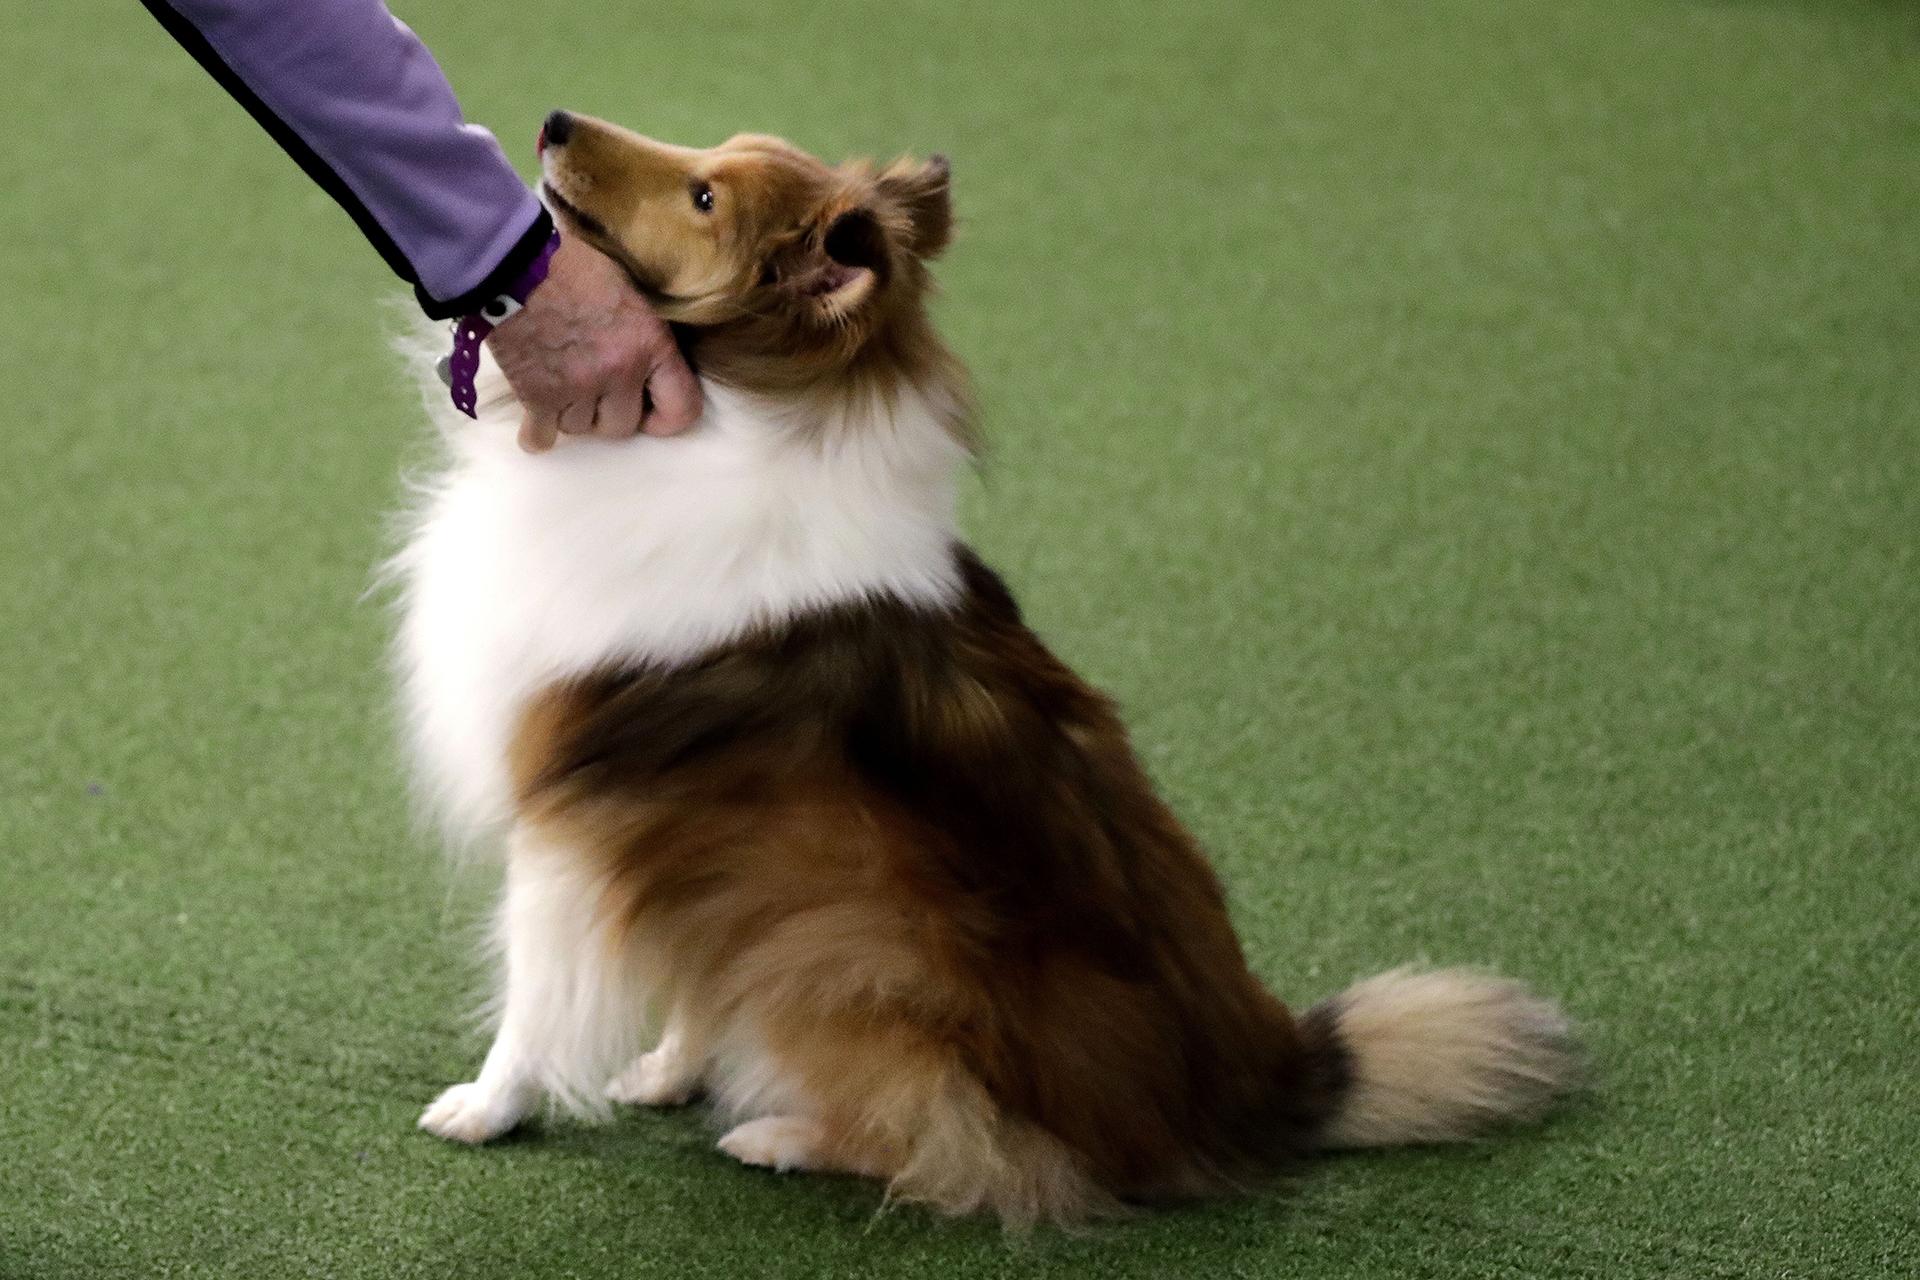 This Feb. 9, 2019 file photo shows a Shetland sheepdog at the Westminster Kennel Club Dog Show in New York. (AP Photo / Wong Maye-E)